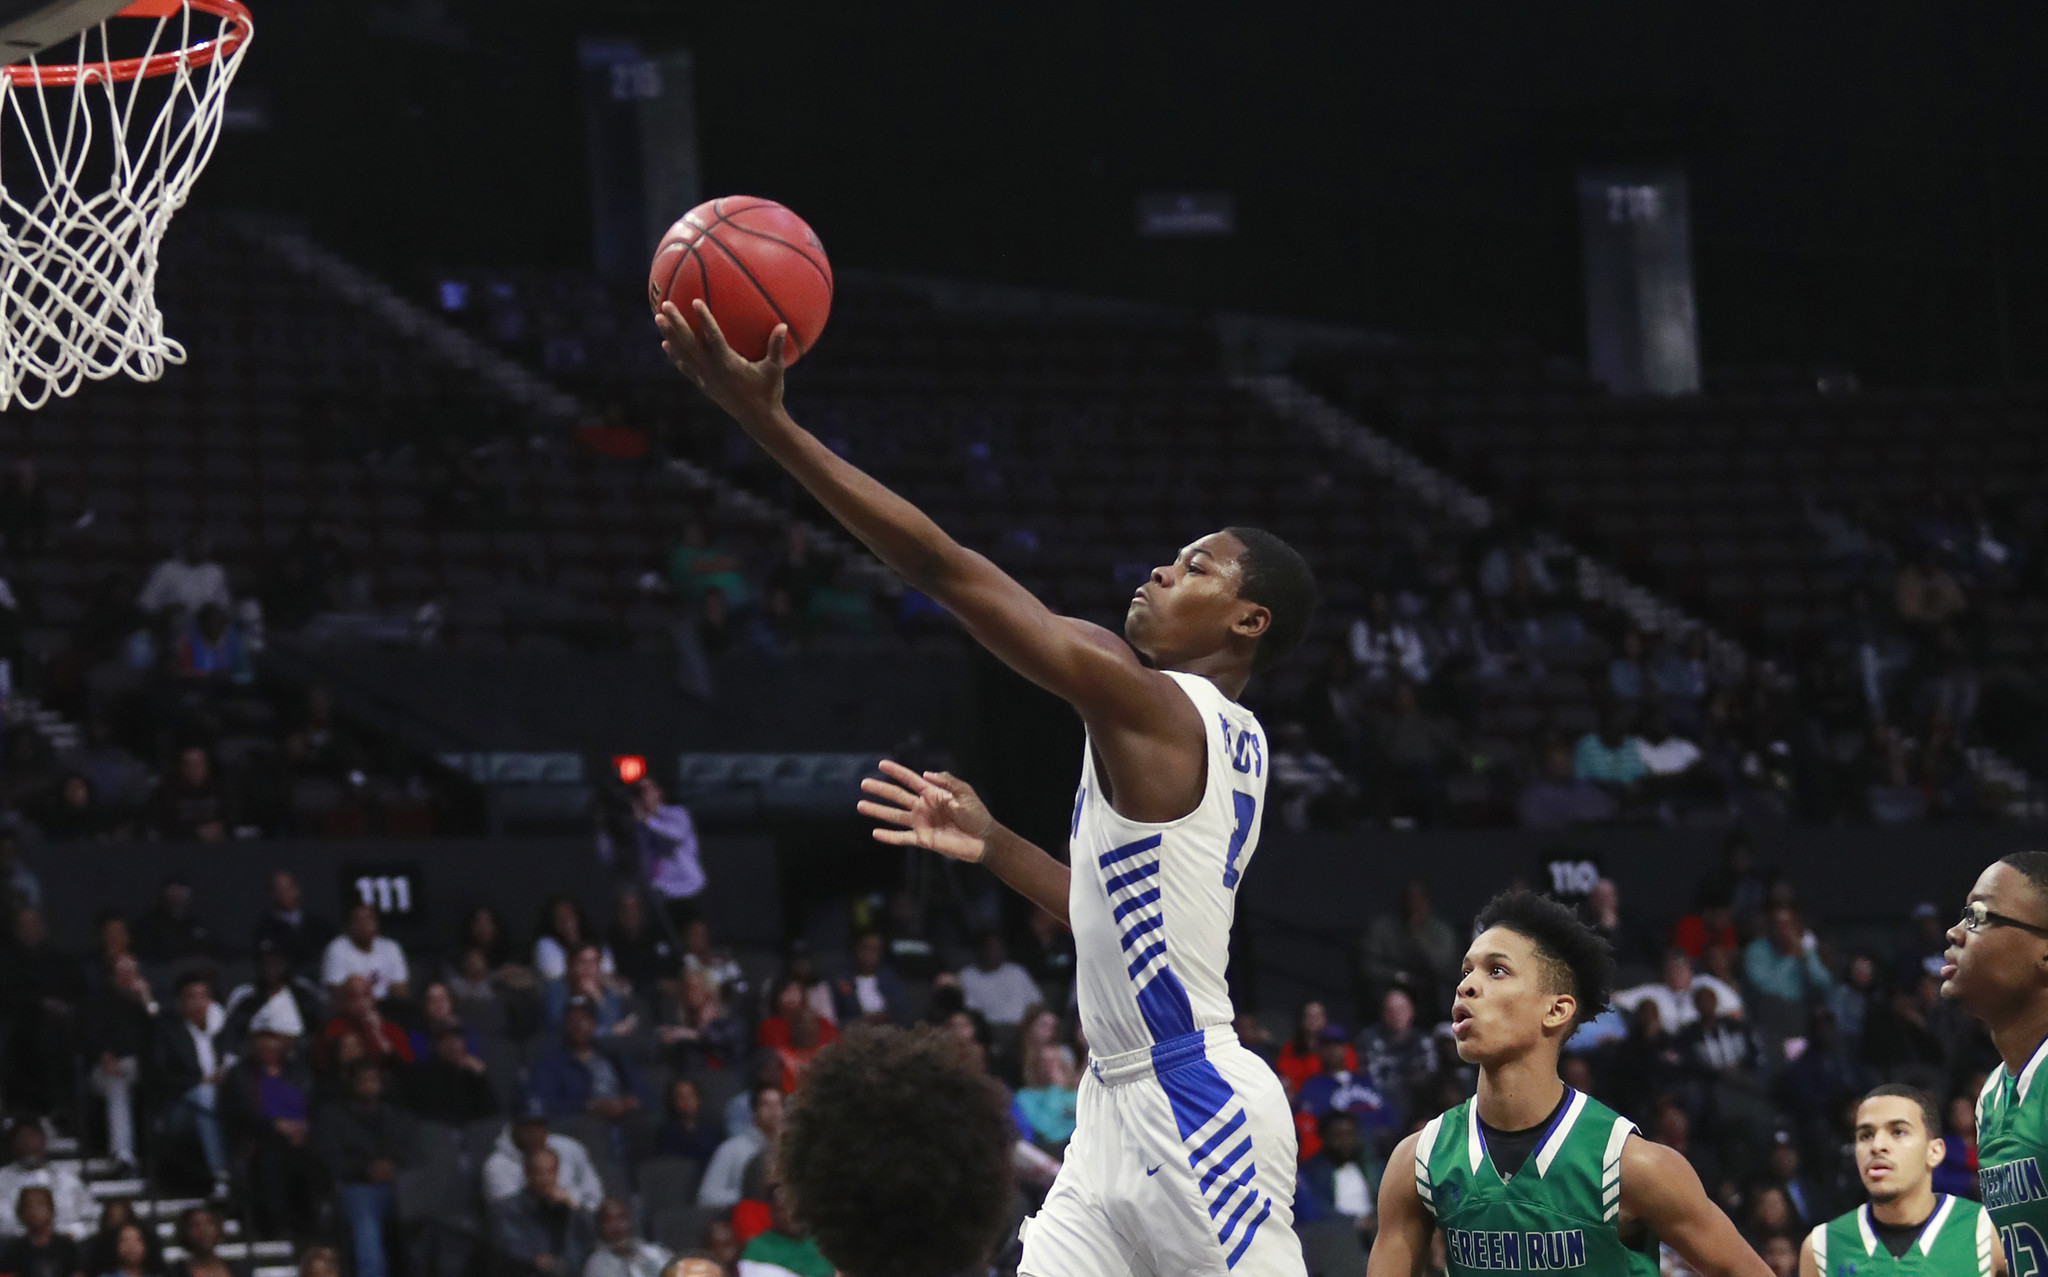 VHSL boys basketball state tournament results and schedules Chicago